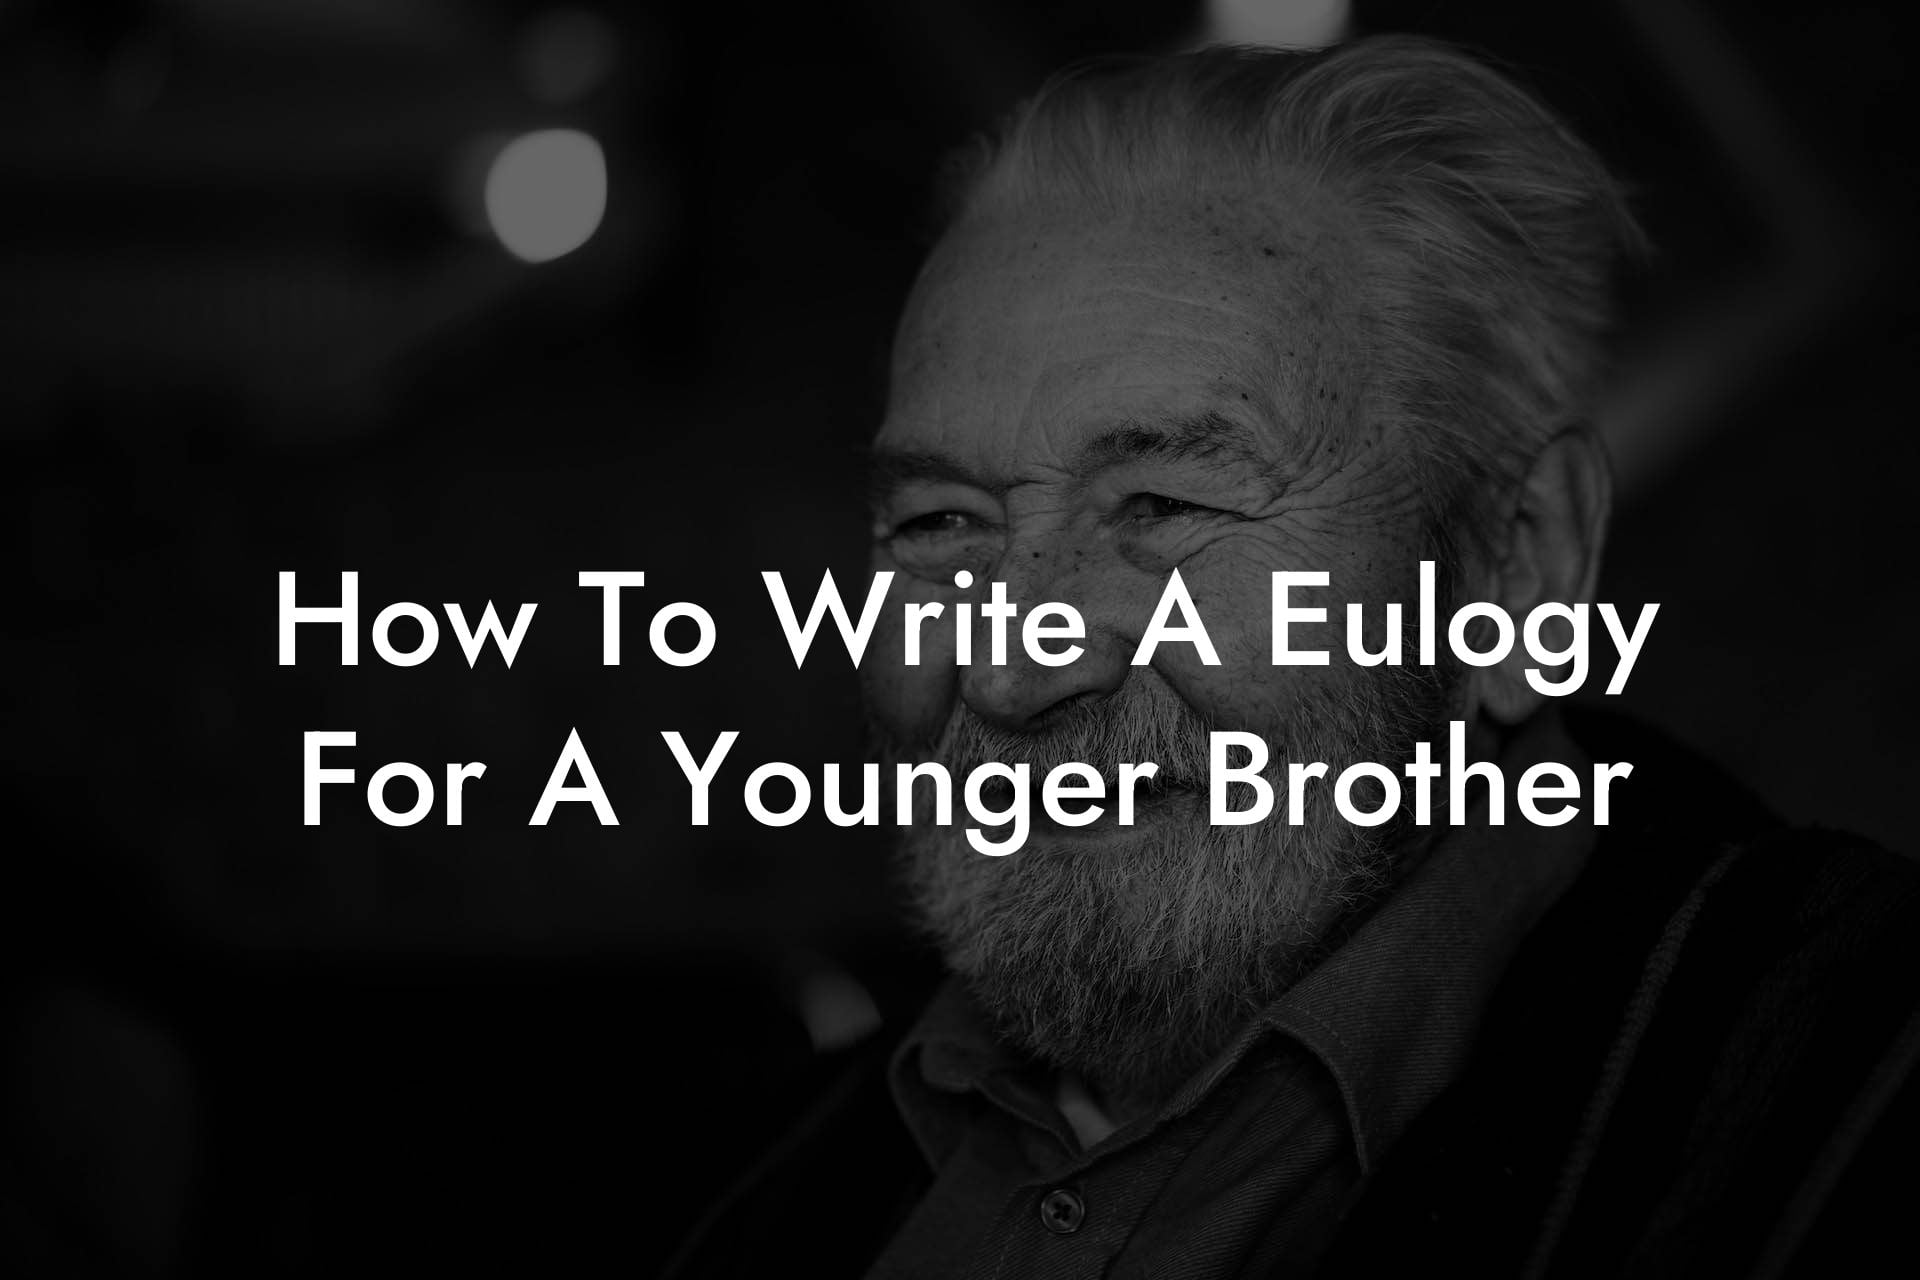 How To Write A Eulogy For A Younger Brother